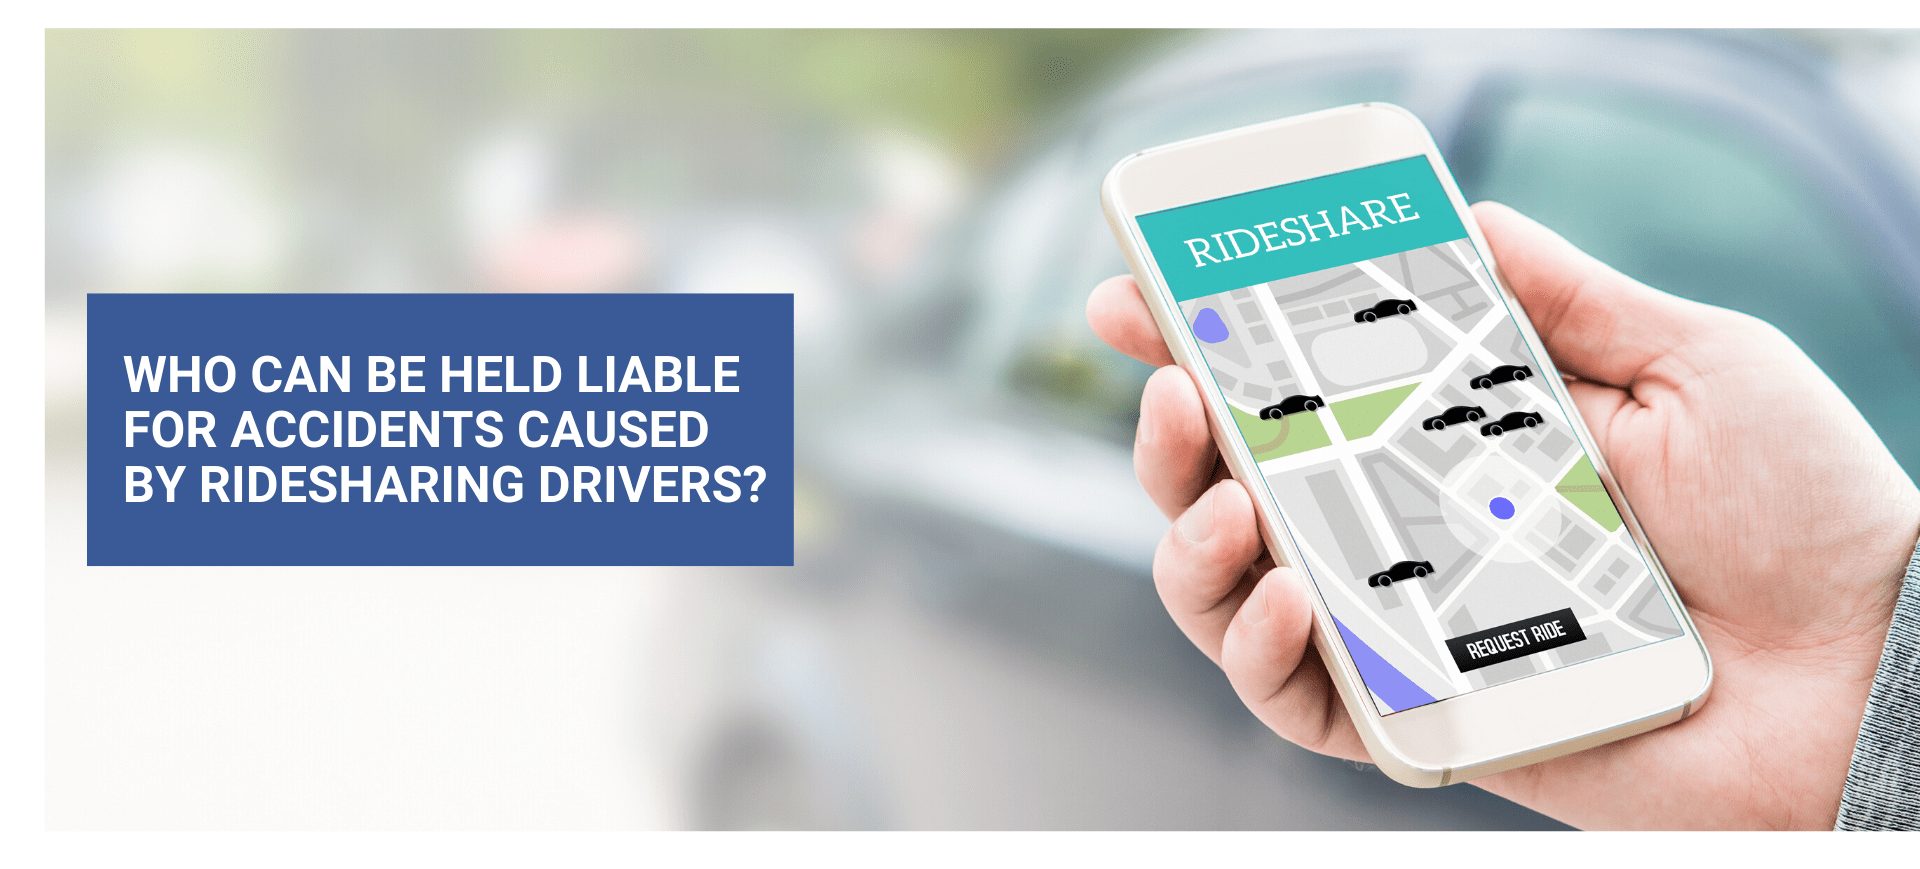 Who Can Be Held Liable for Accidents Caused By Ridesharing Drivers?